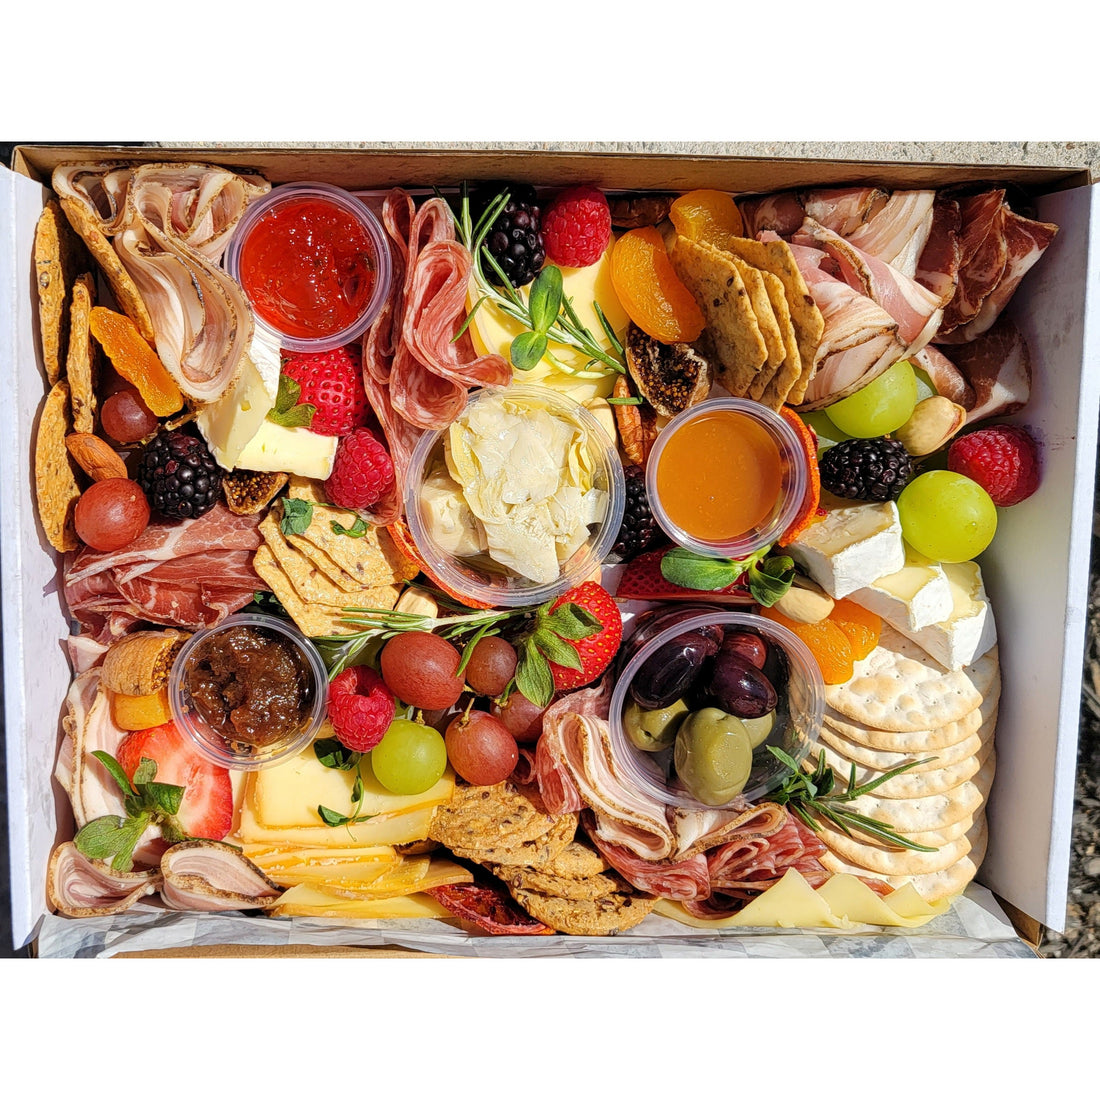 Charcuterie Box to Go! MEDIUM - pick up and same day delivery (Ottawa Area)